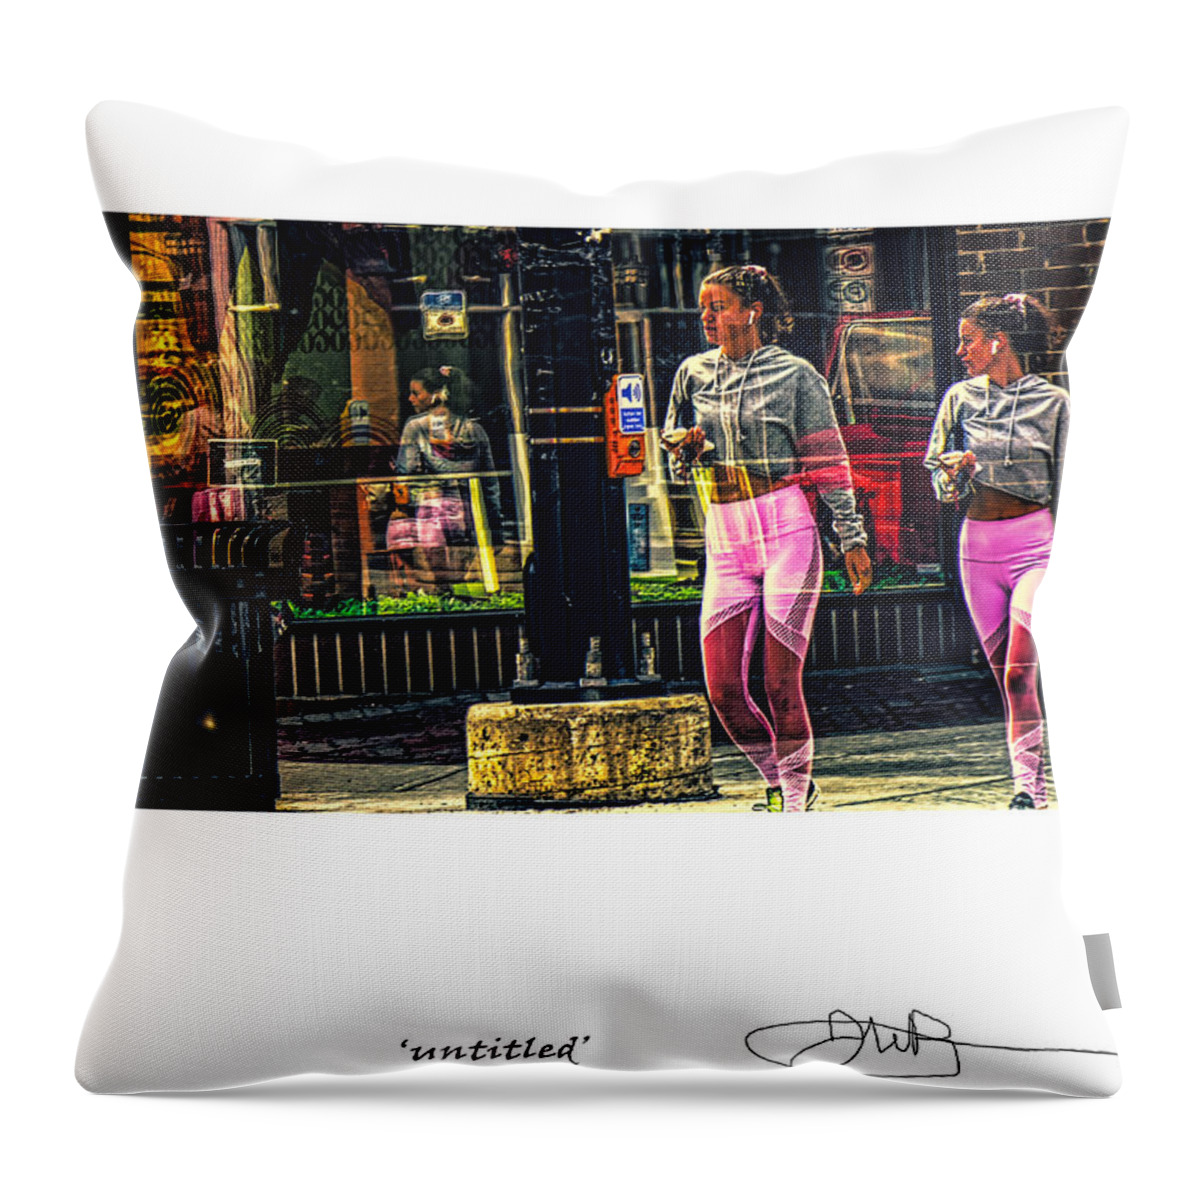 Signed Limited Edition Of 10 Throw Pillow featuring the digital art 42 by Jerald Blackstock